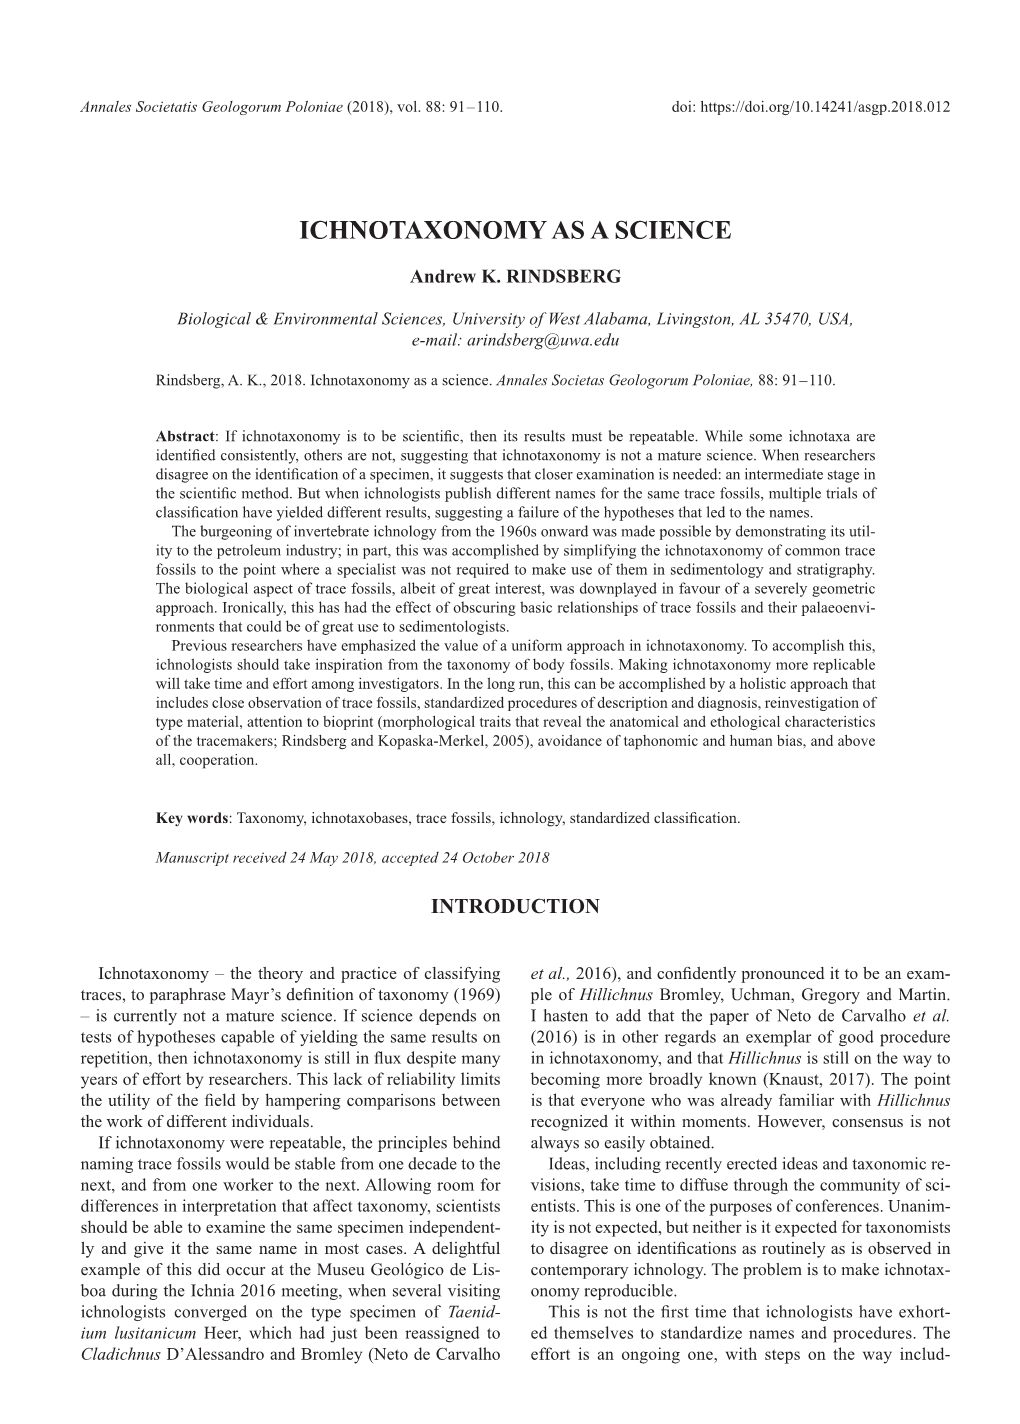 Ichnotaxonomy As a Science